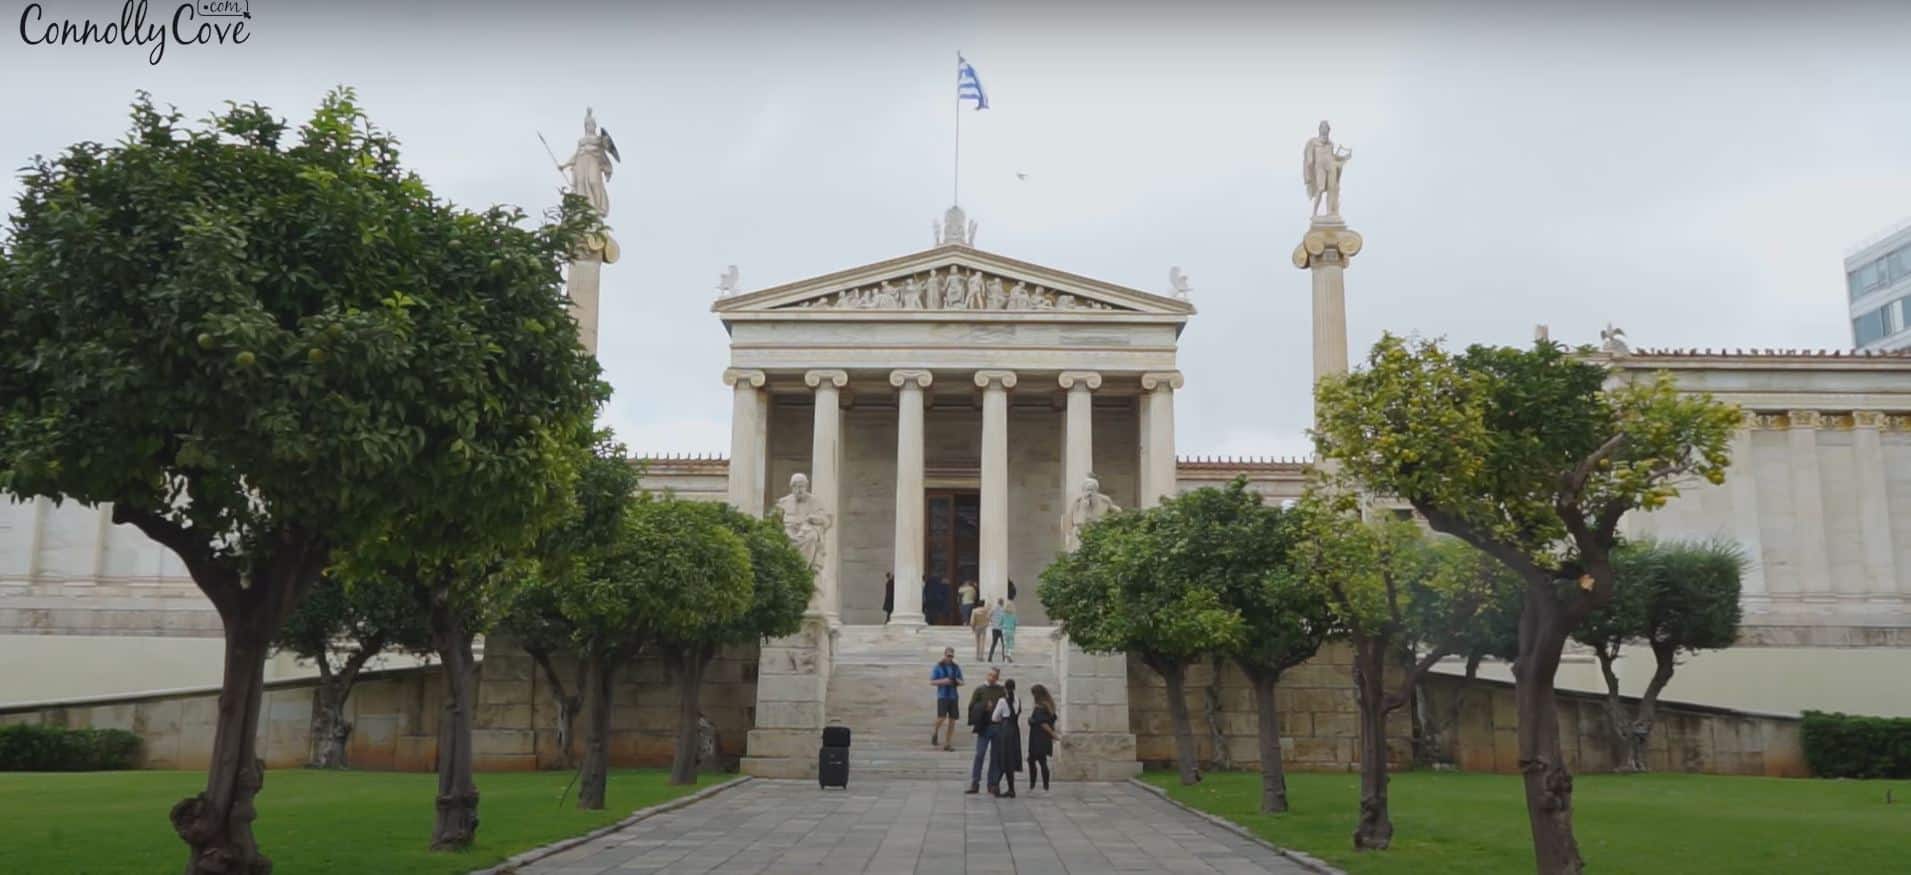 A remarkable landmark in Athens, Greece, Academy of Athens